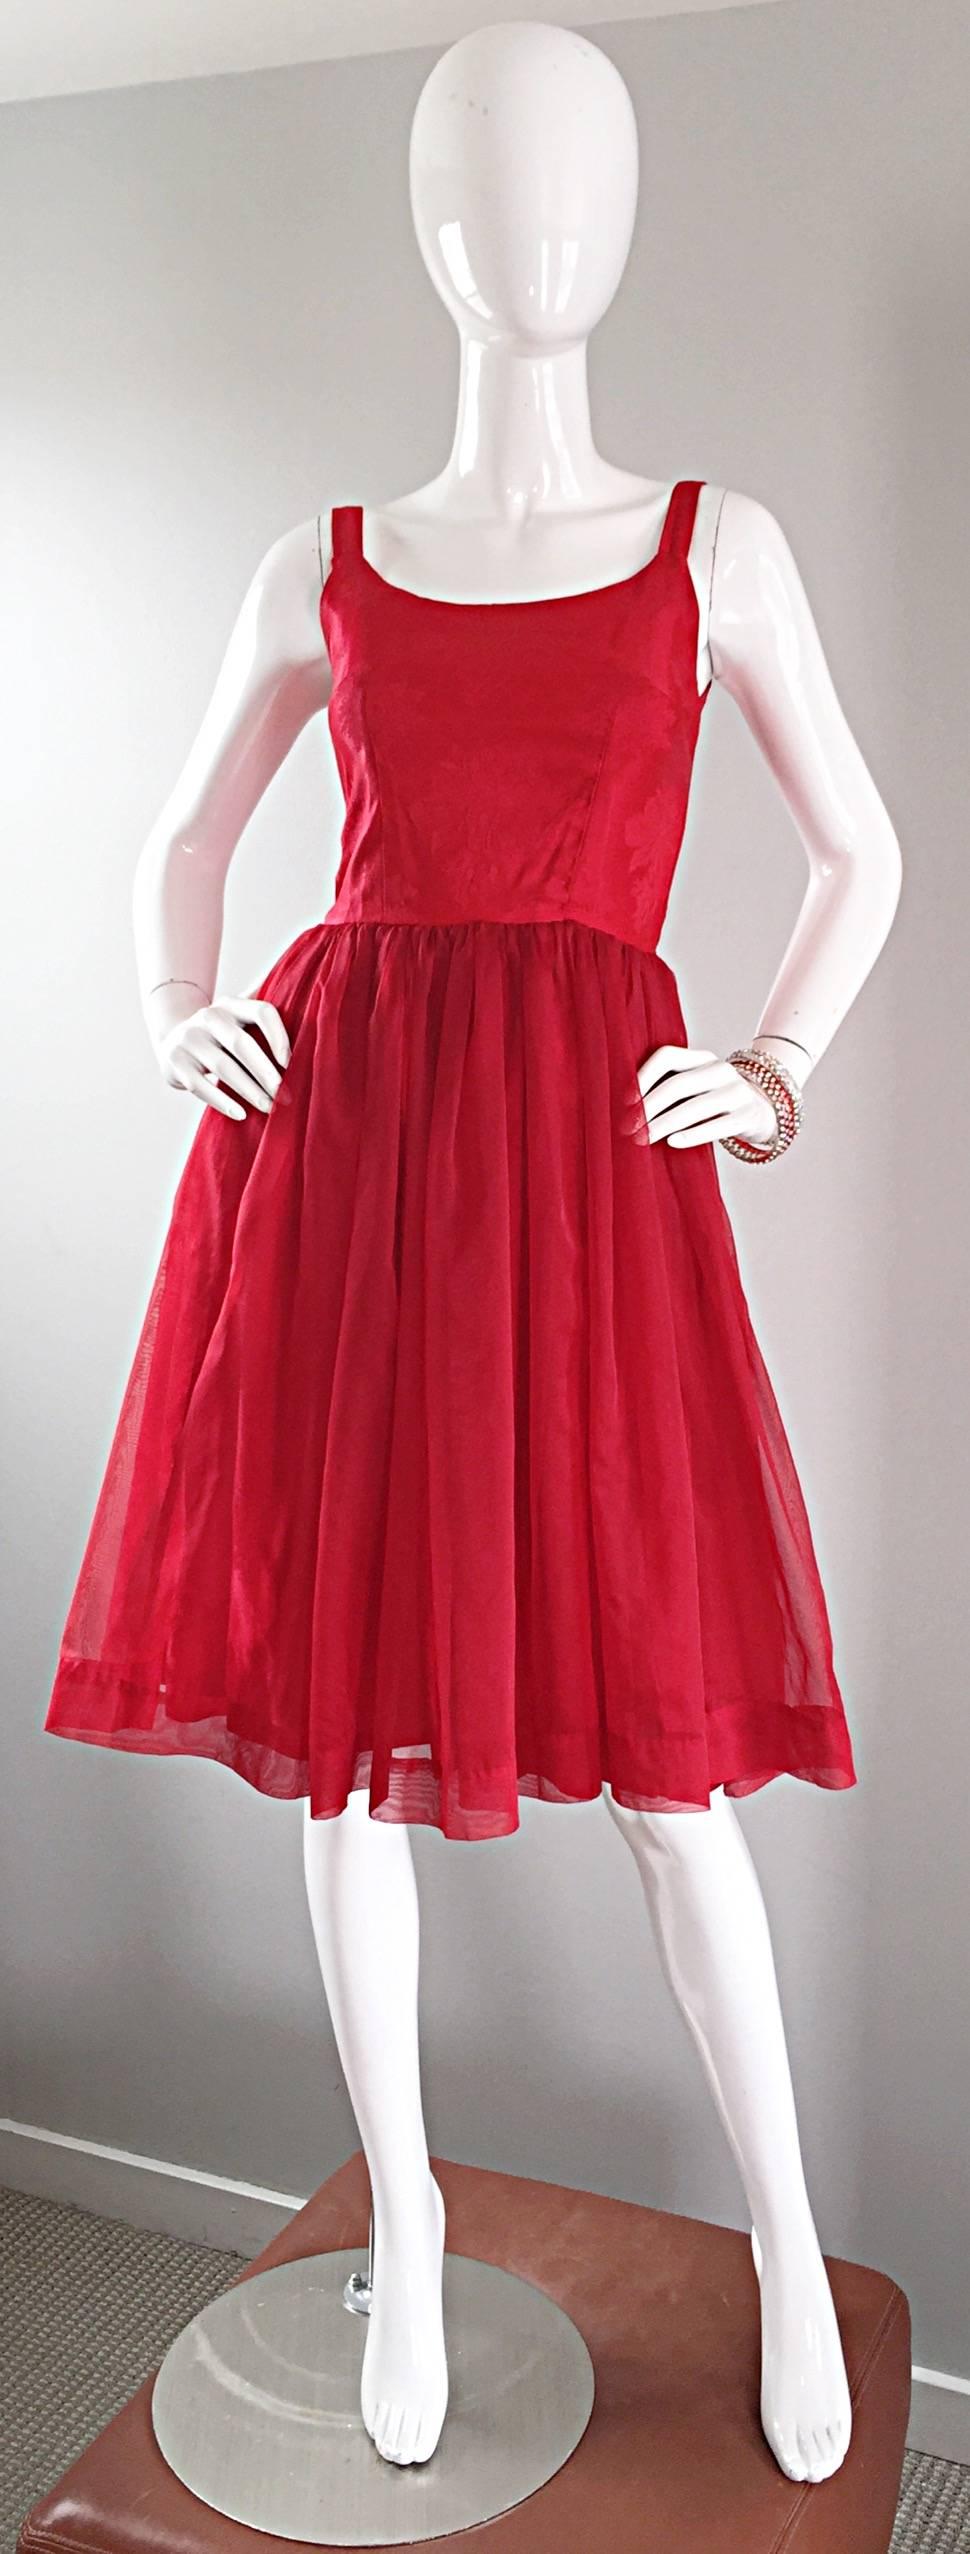 Stunning 1950s vintage lipstick red DEMI COUTURE silk brocade dress! Floral brocade throughout with a wonderful chiffon overlay skirt. Mostly hand sewn. Full metal zipper up the back. Very well constructed with a heavy eye to detail. Perfect from